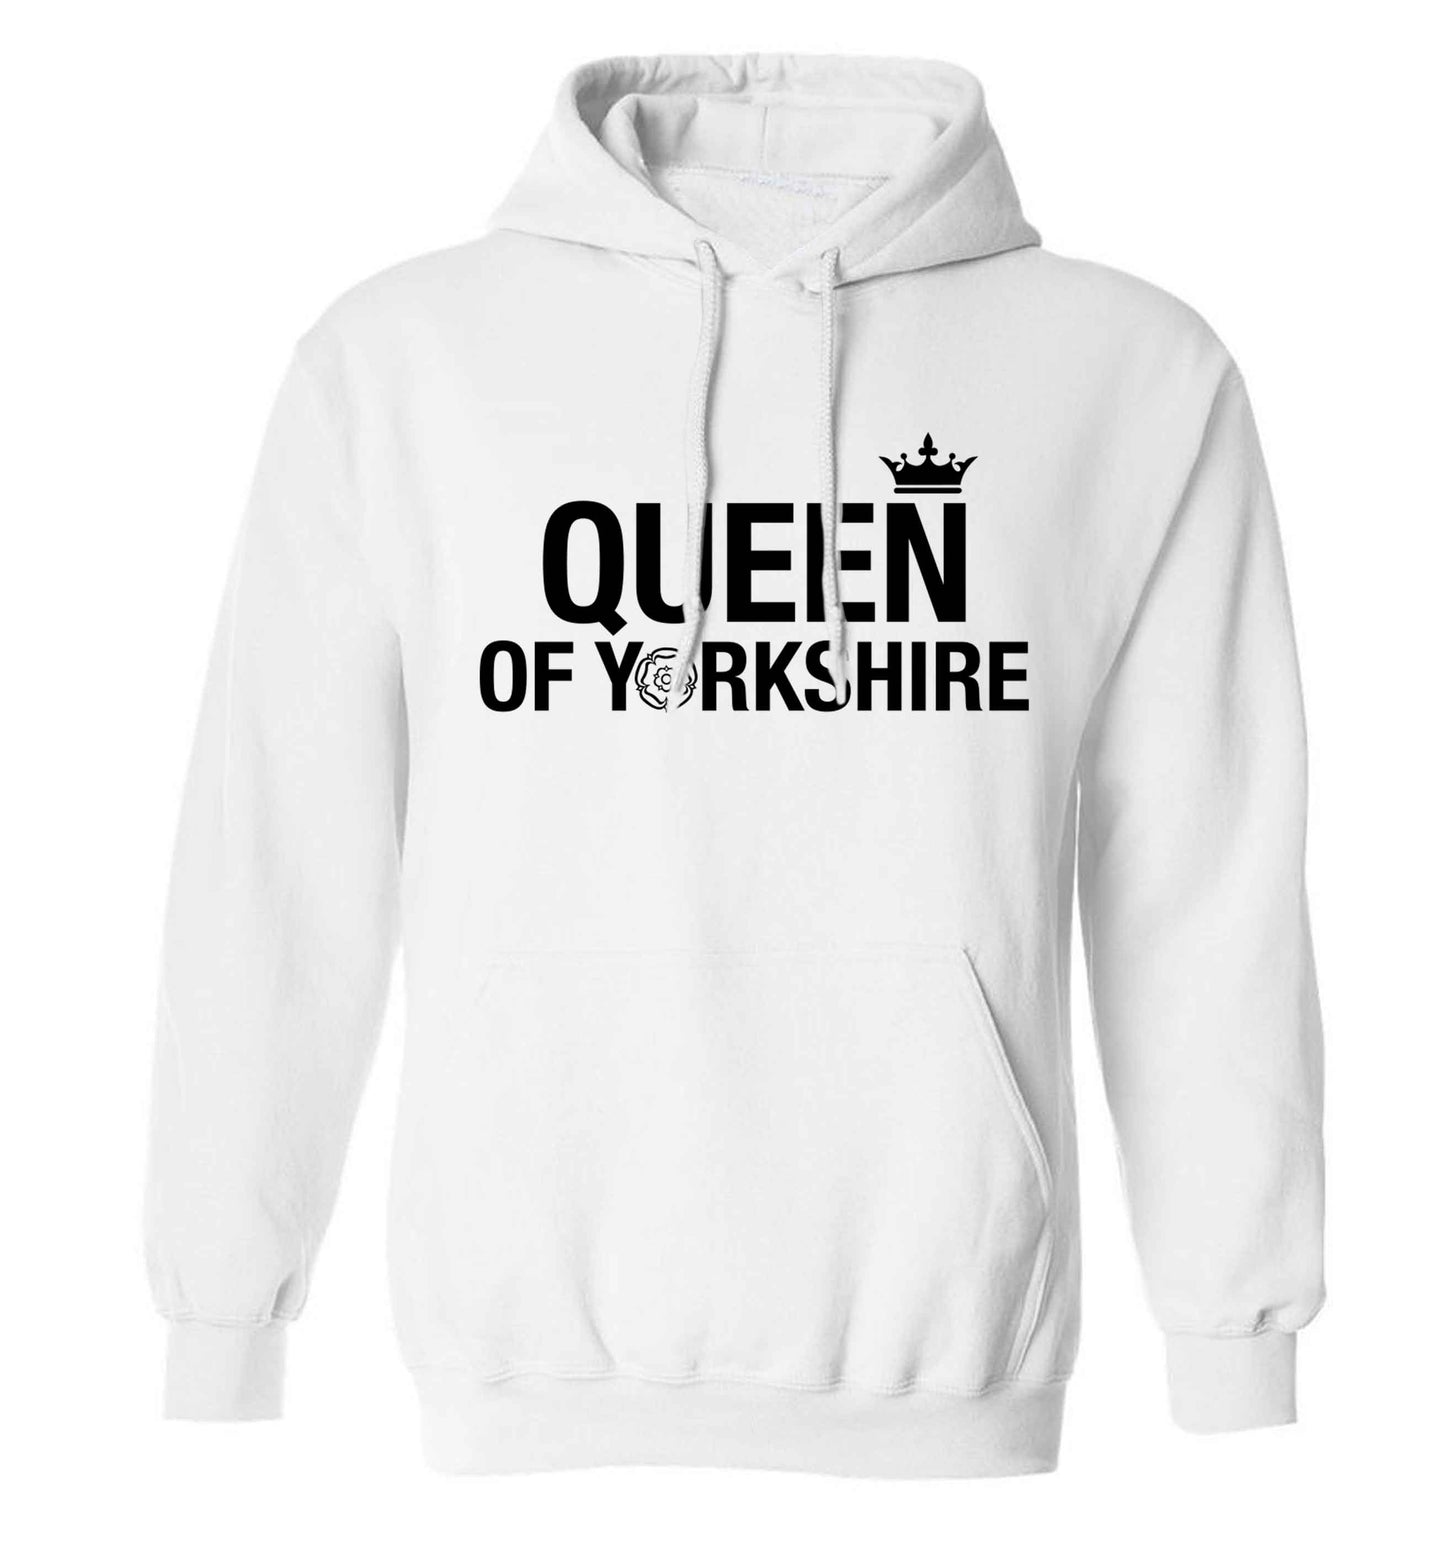 Queen of Yorkshire adults unisex white hoodie 2XL